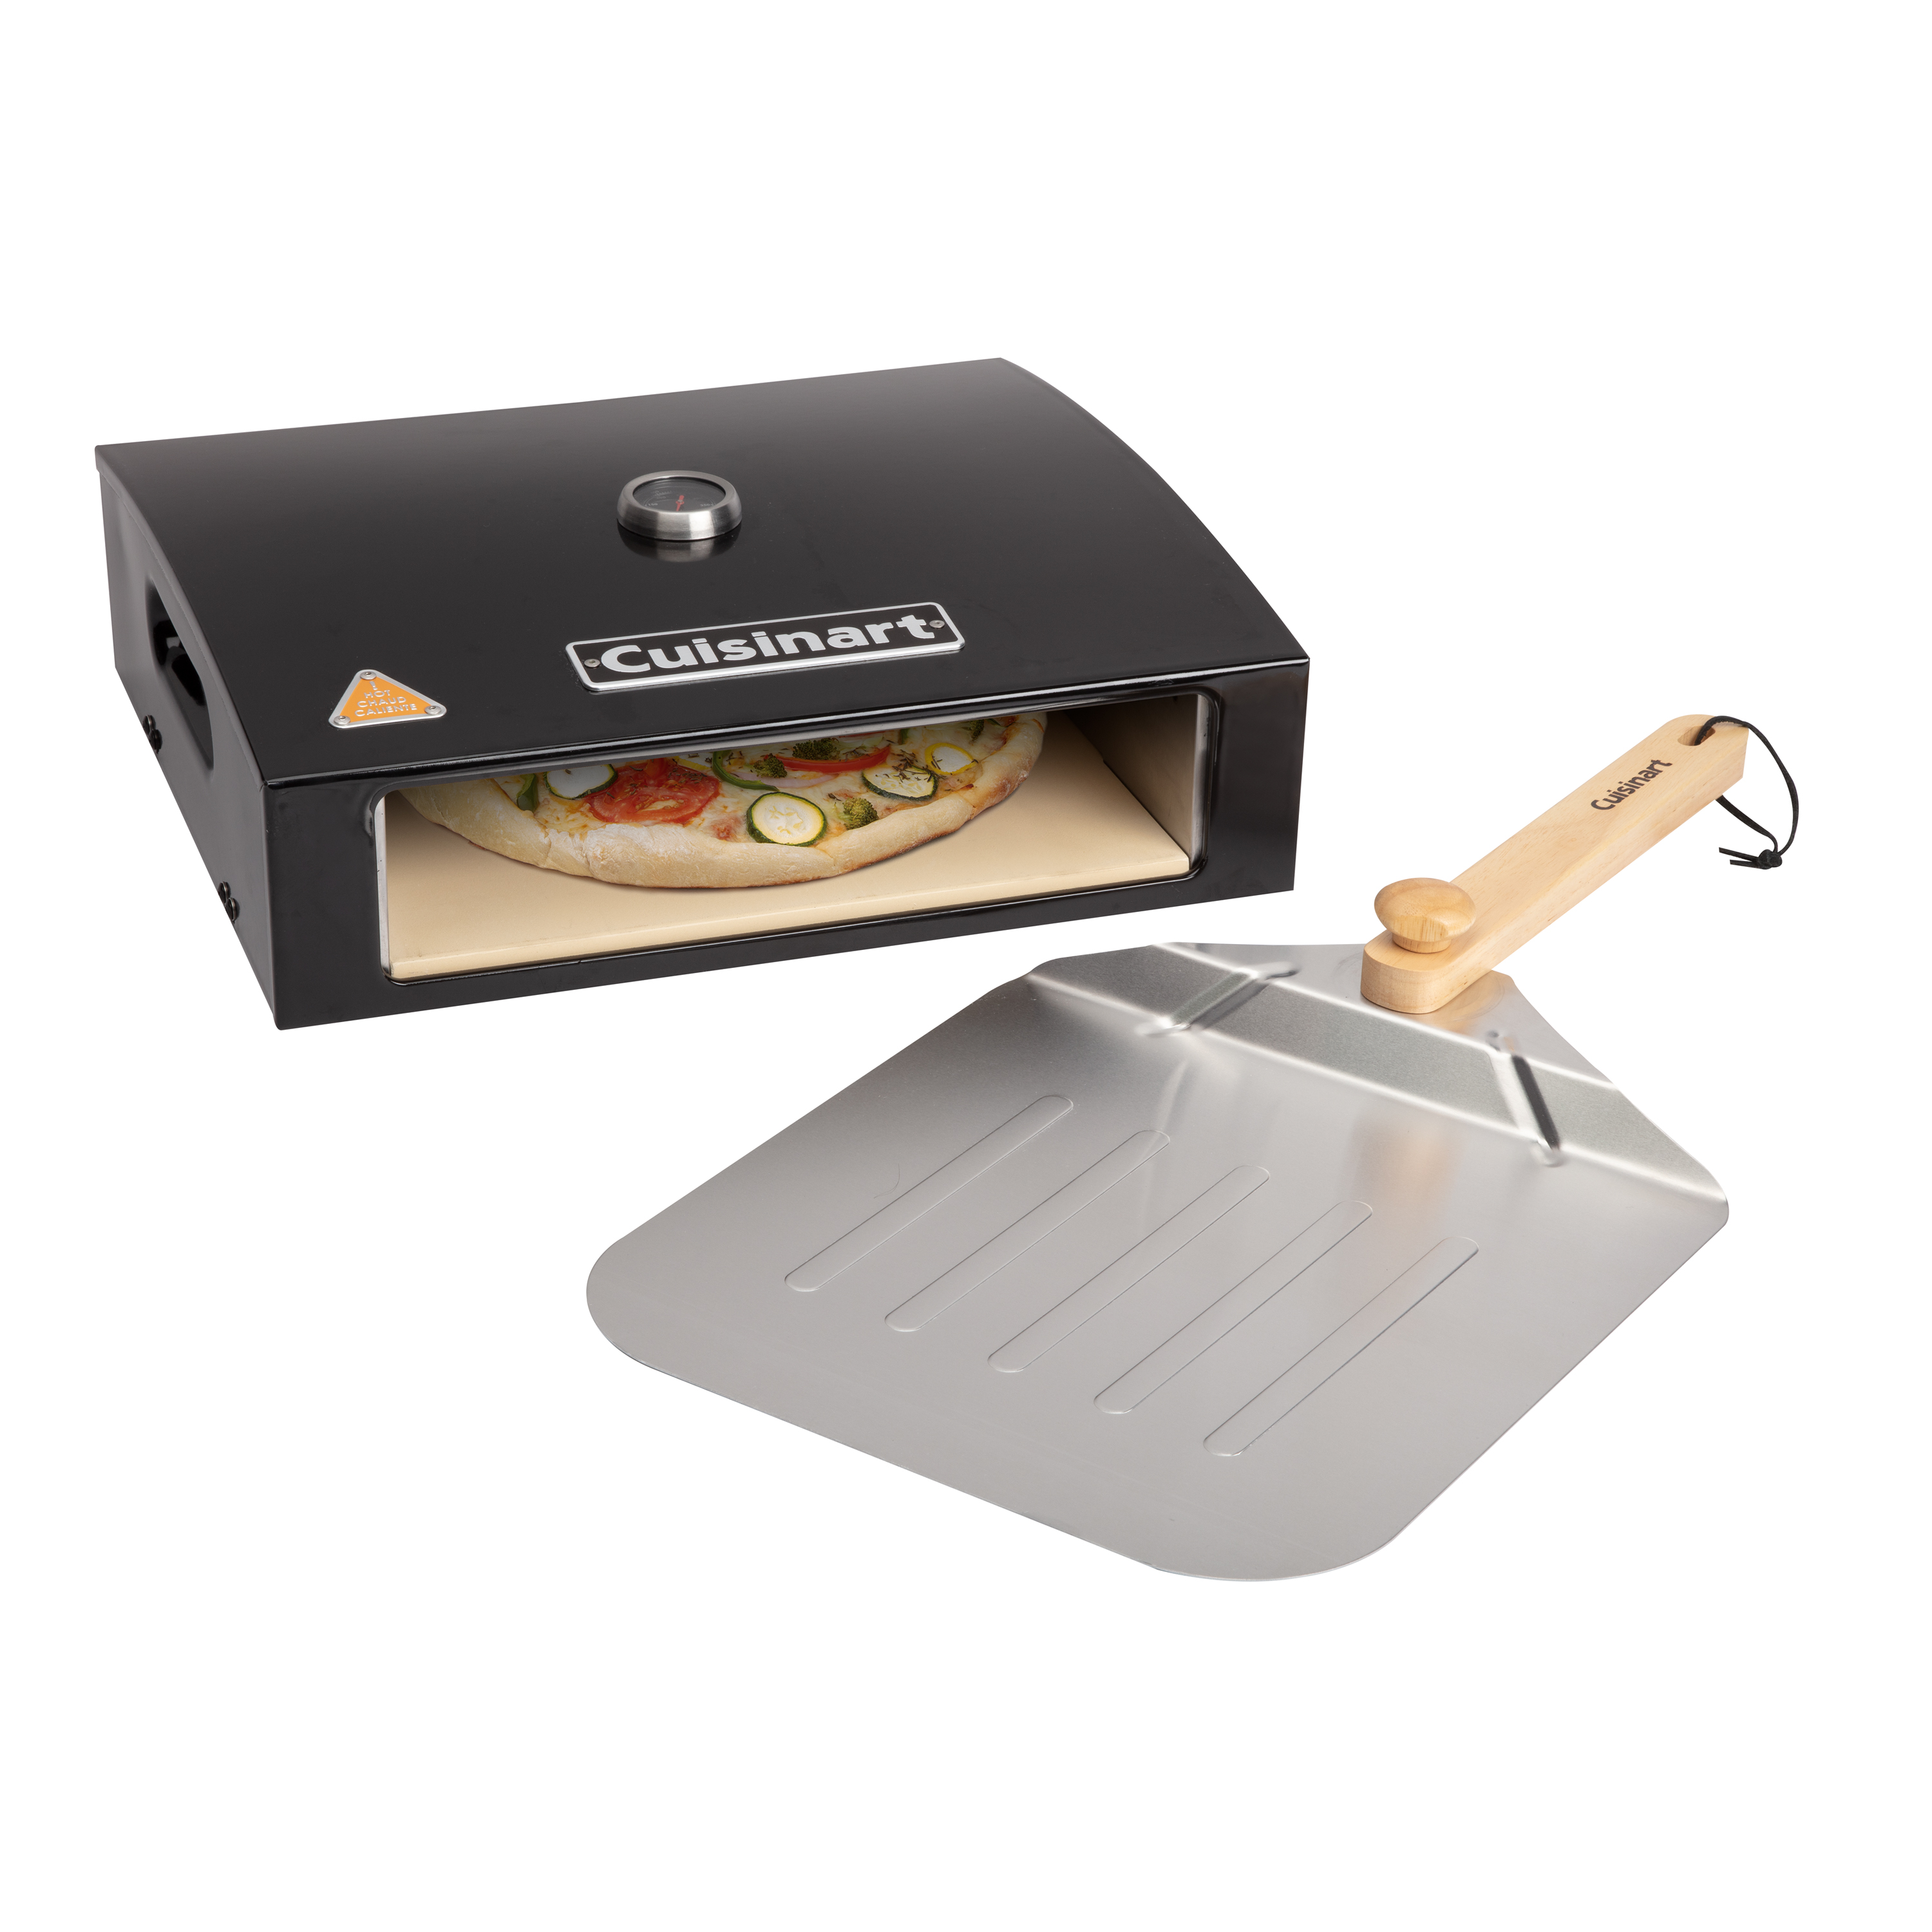 Cuisinart Grill Top Pizza Oven Kit - image 1 of 9